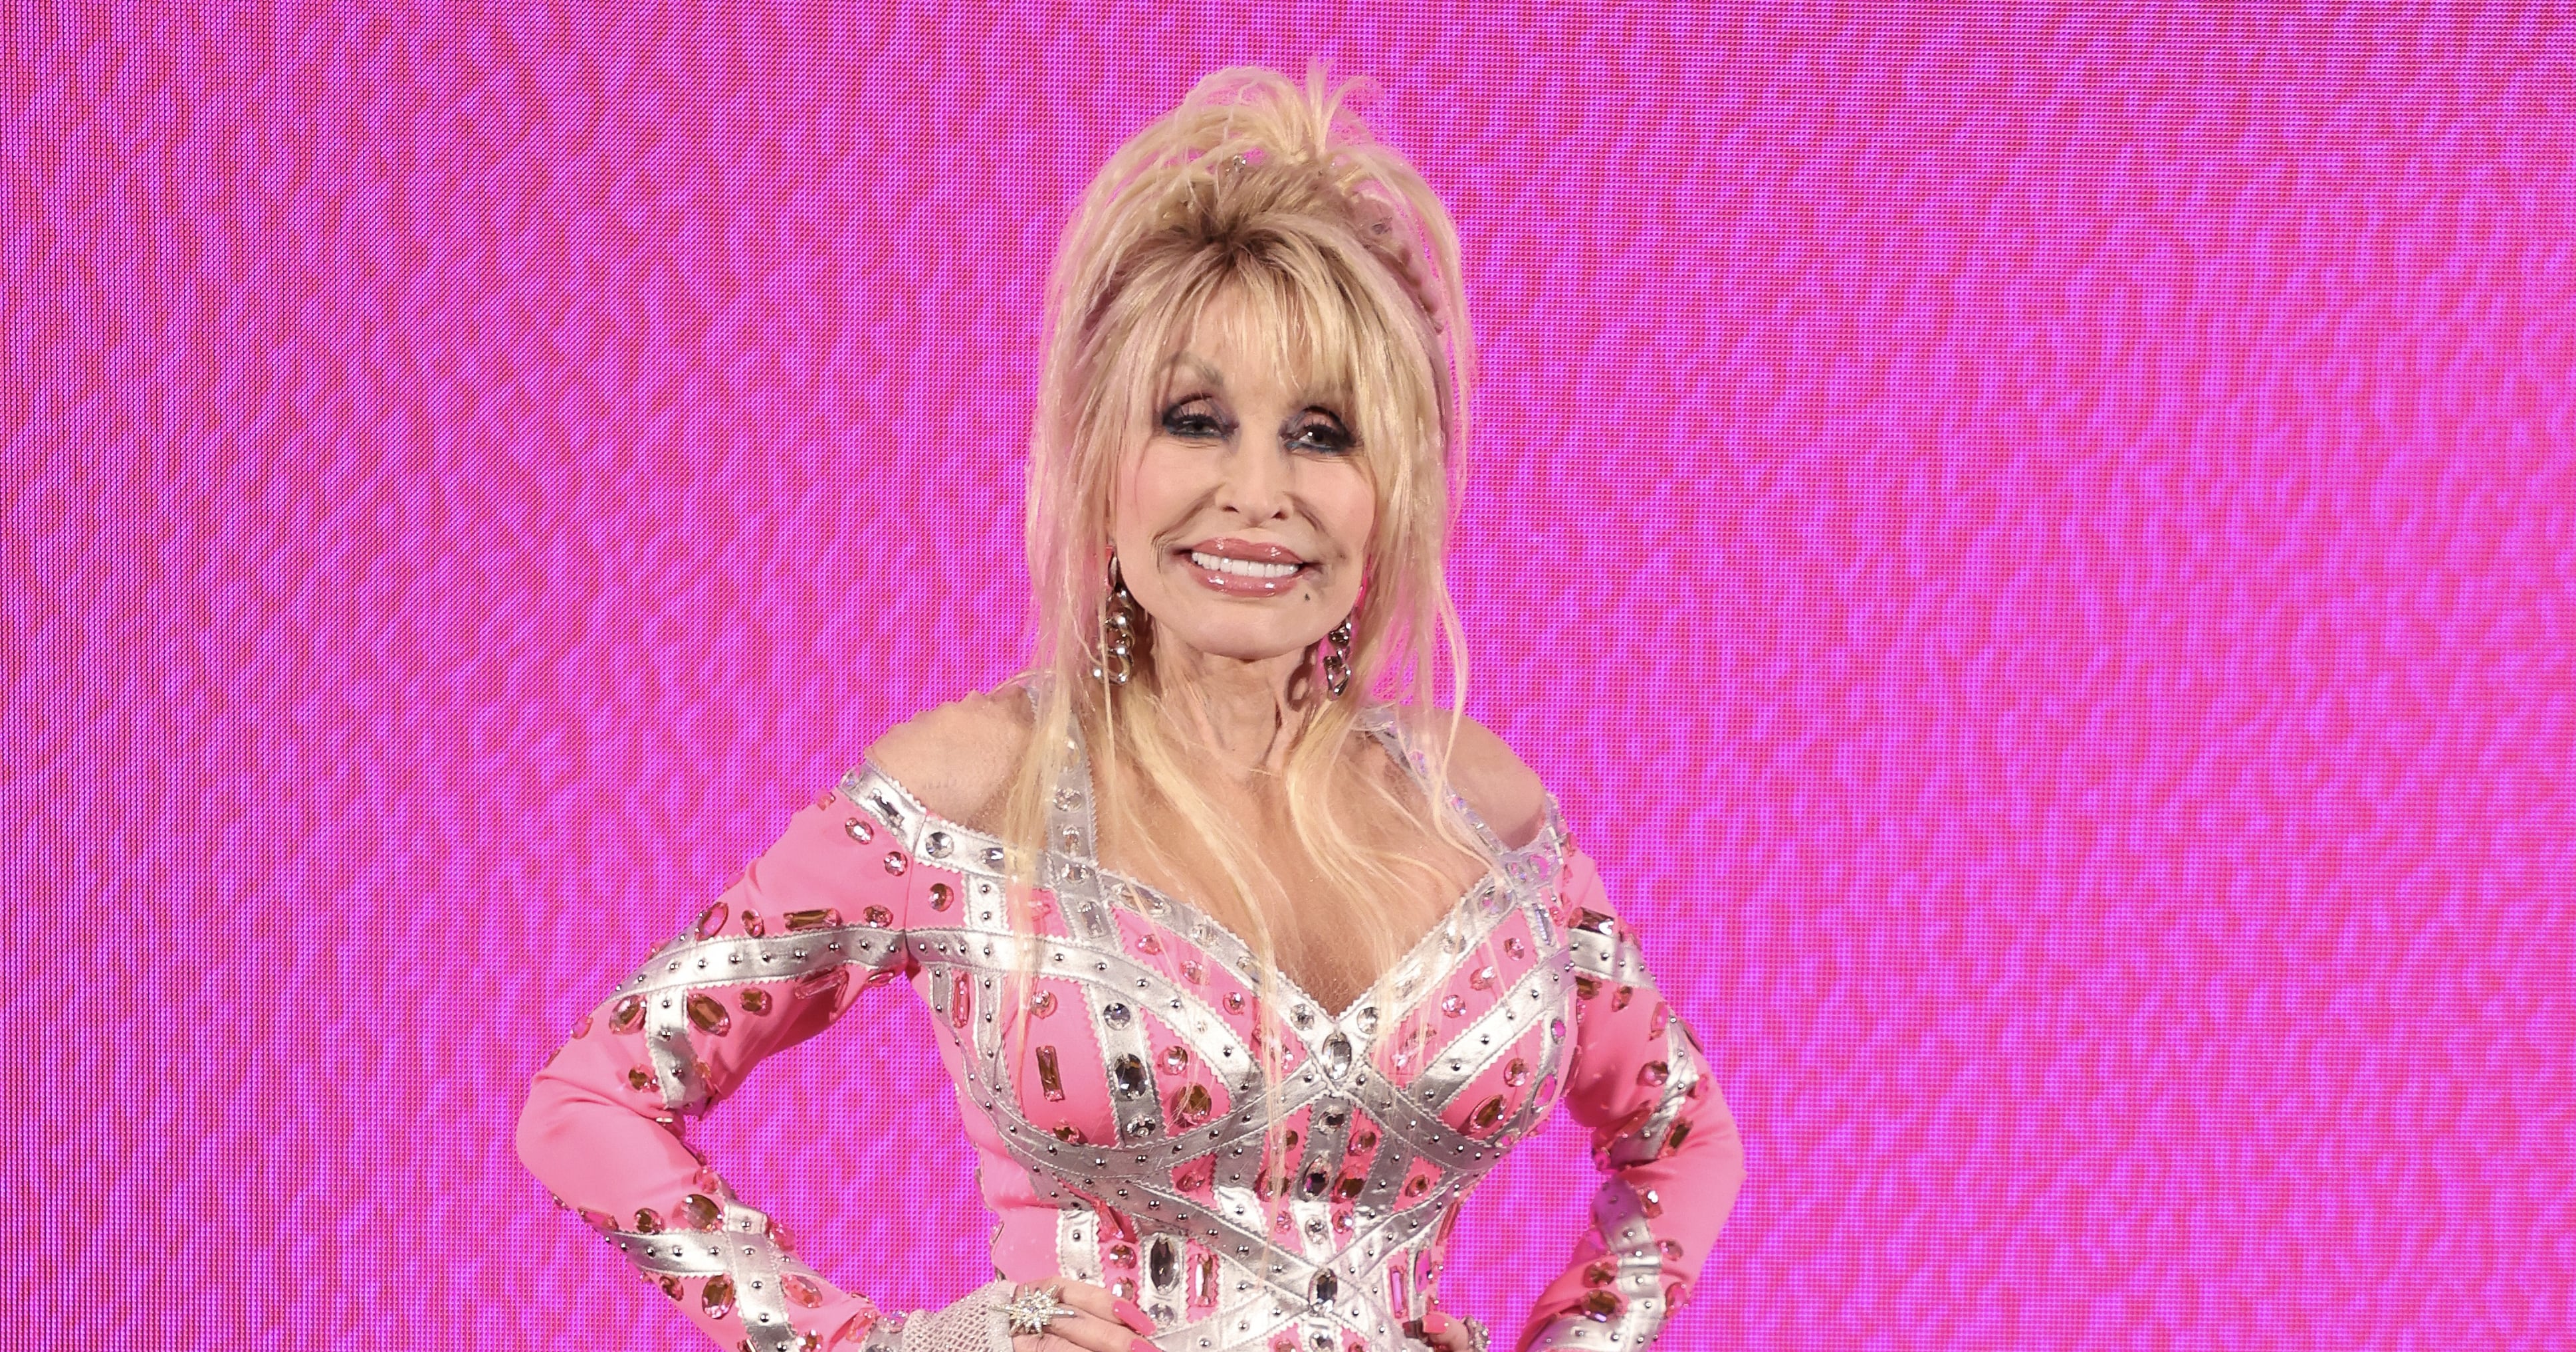 The Mysterious Case of Dolly Parton's Tattoo Collection